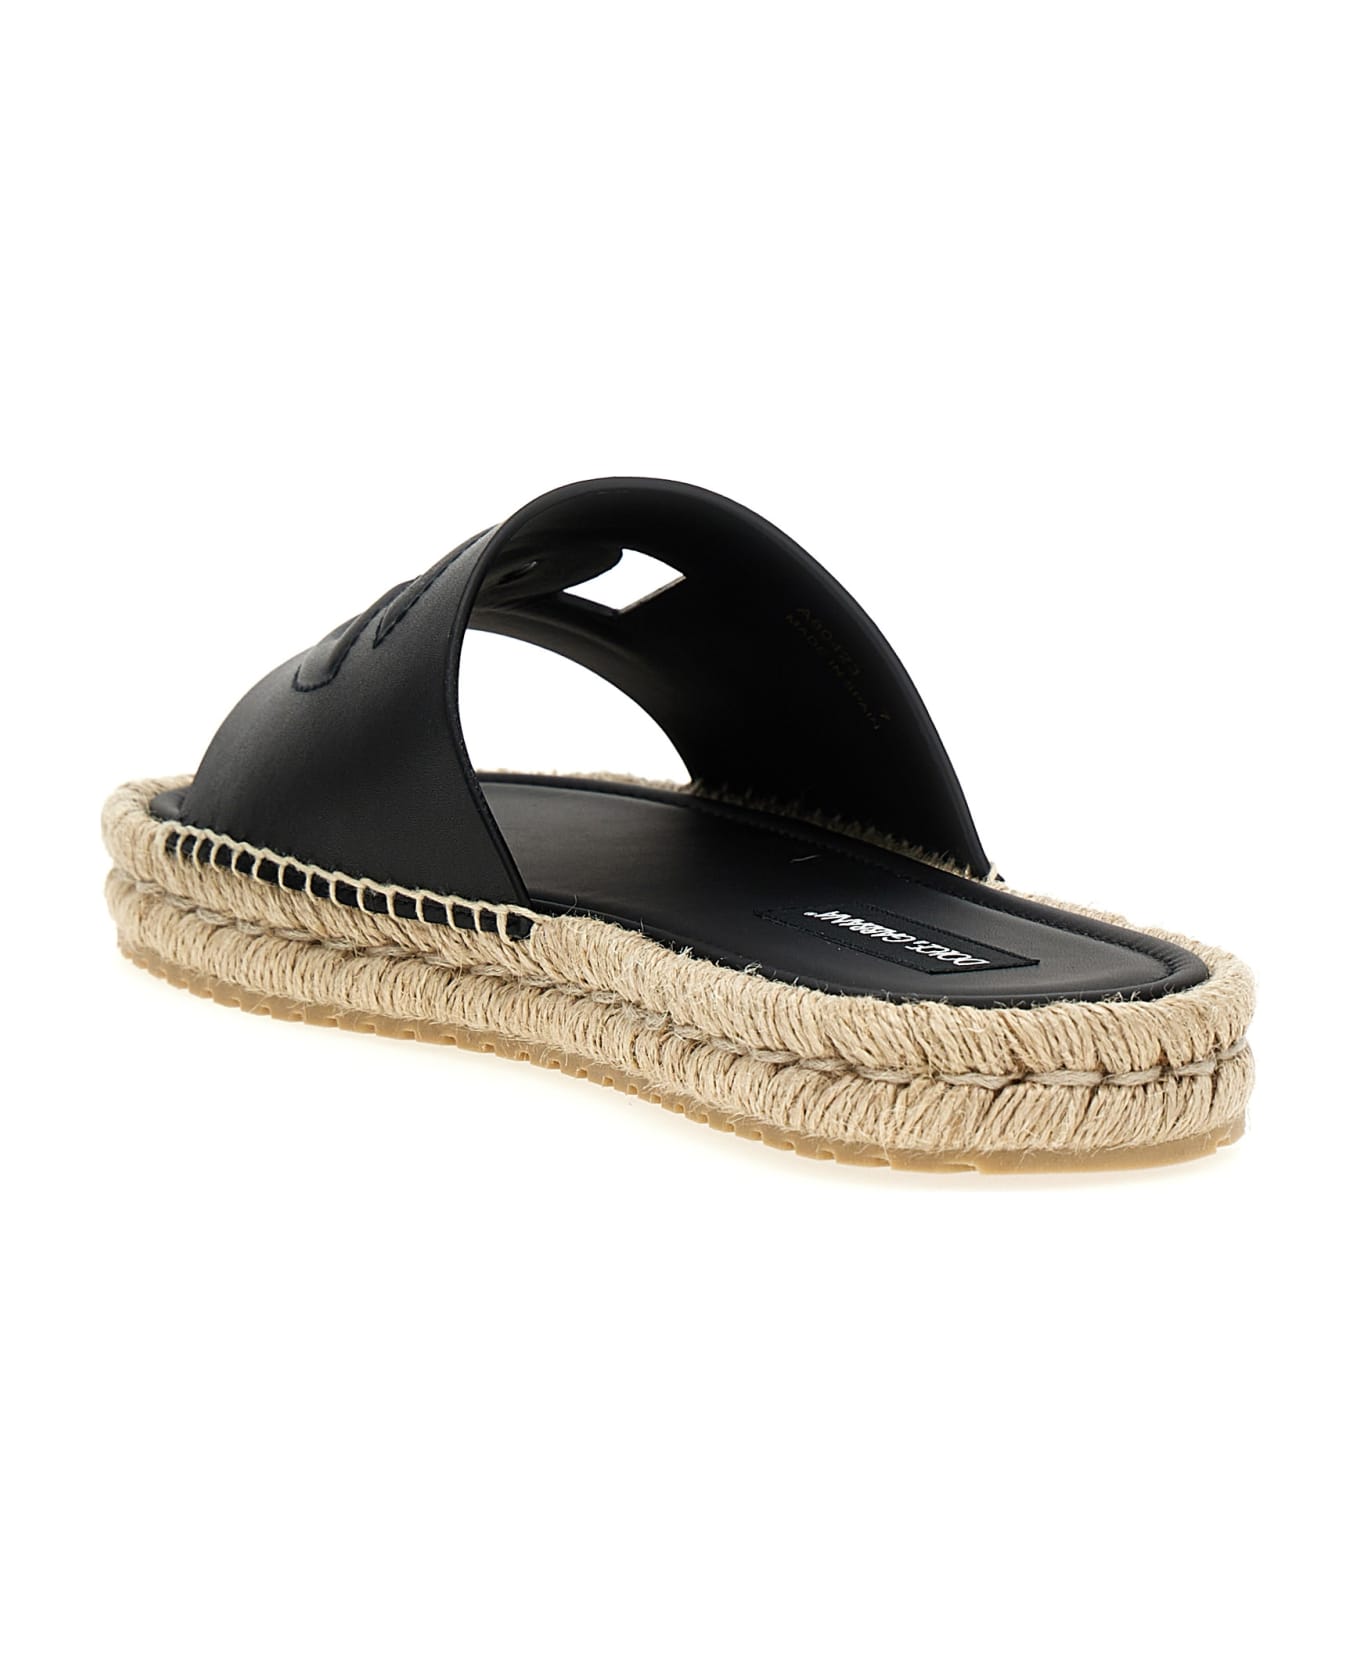 Dolce & Gabbana Leather Sandals - Black その他各種シューズ